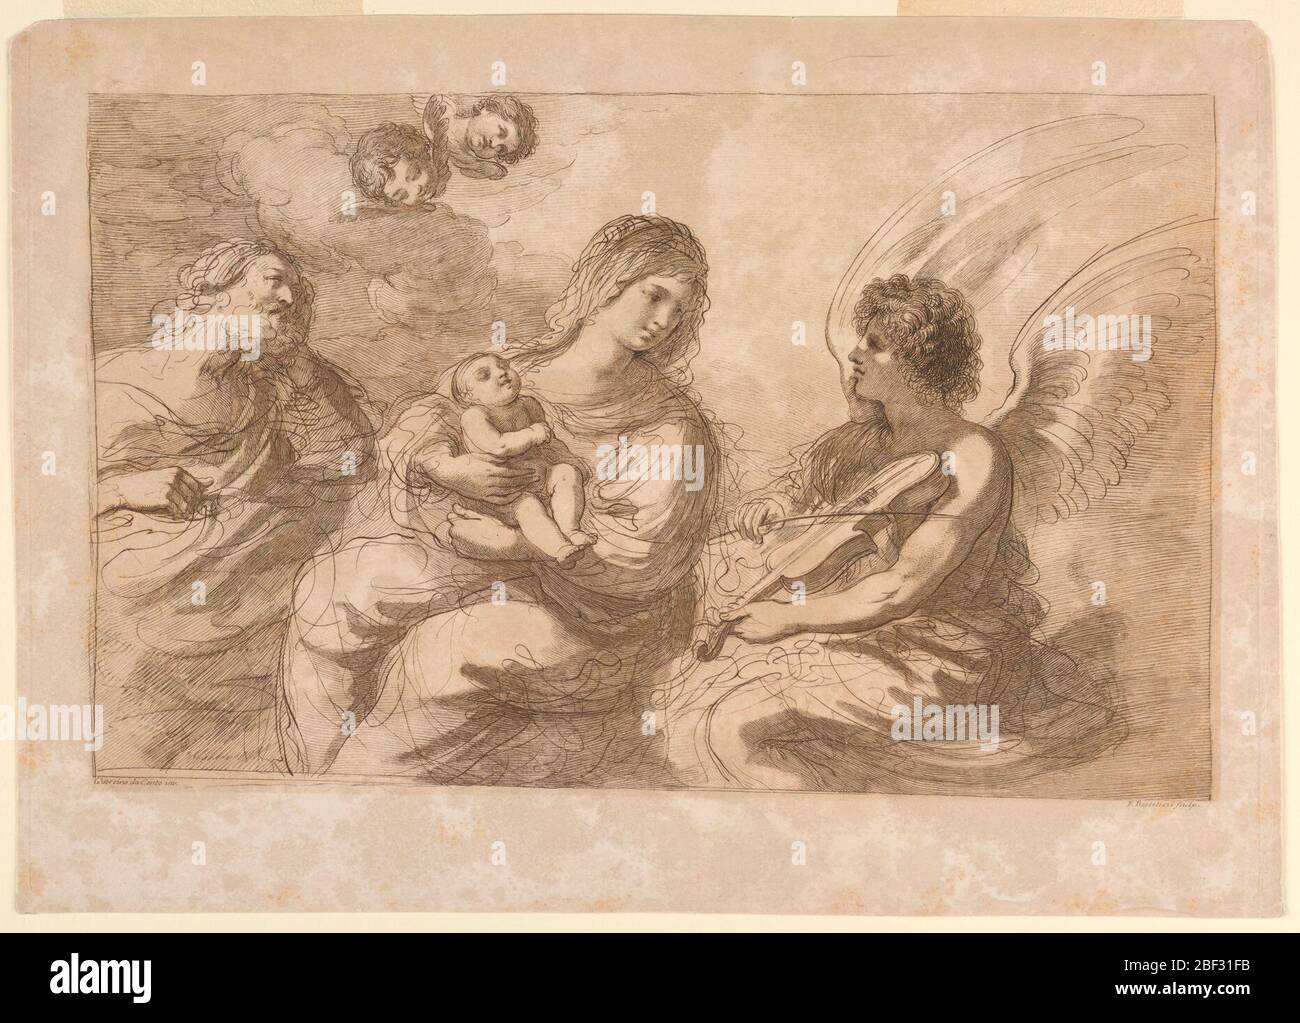 Virgin Infant and Joseph with an Angel Playing on a Violin. The Virgin seated, with the Infant in her arms, watches the Angel to her left, playing the violin. Joseph, left, faces them both. Two putti, upper left, look down. Below, the artists' names. Stock Photo